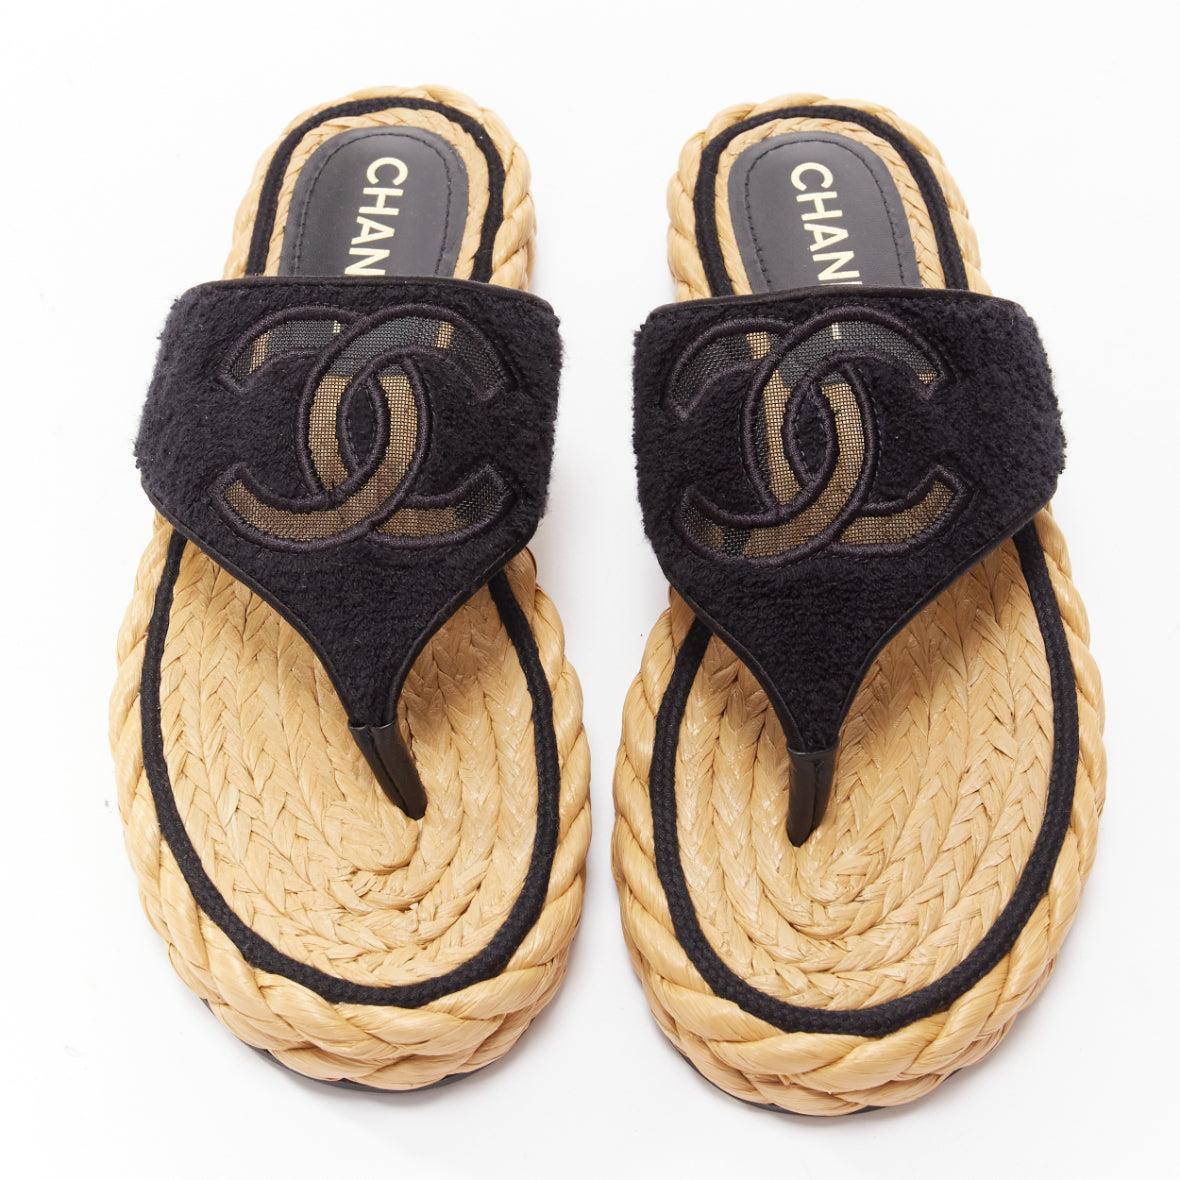 CHANEL 2022 black towelling CC mesh espadrille thong platform sandals EU37
Reference: LNKO/A02297
Brand: Chanel
Designer: Virginie Viard
Collection: 2022
Material: Fabric, Straw
Color: Black, Brown
Pattern: Solid
Closure: Slip On
Lining: Brown
Extra